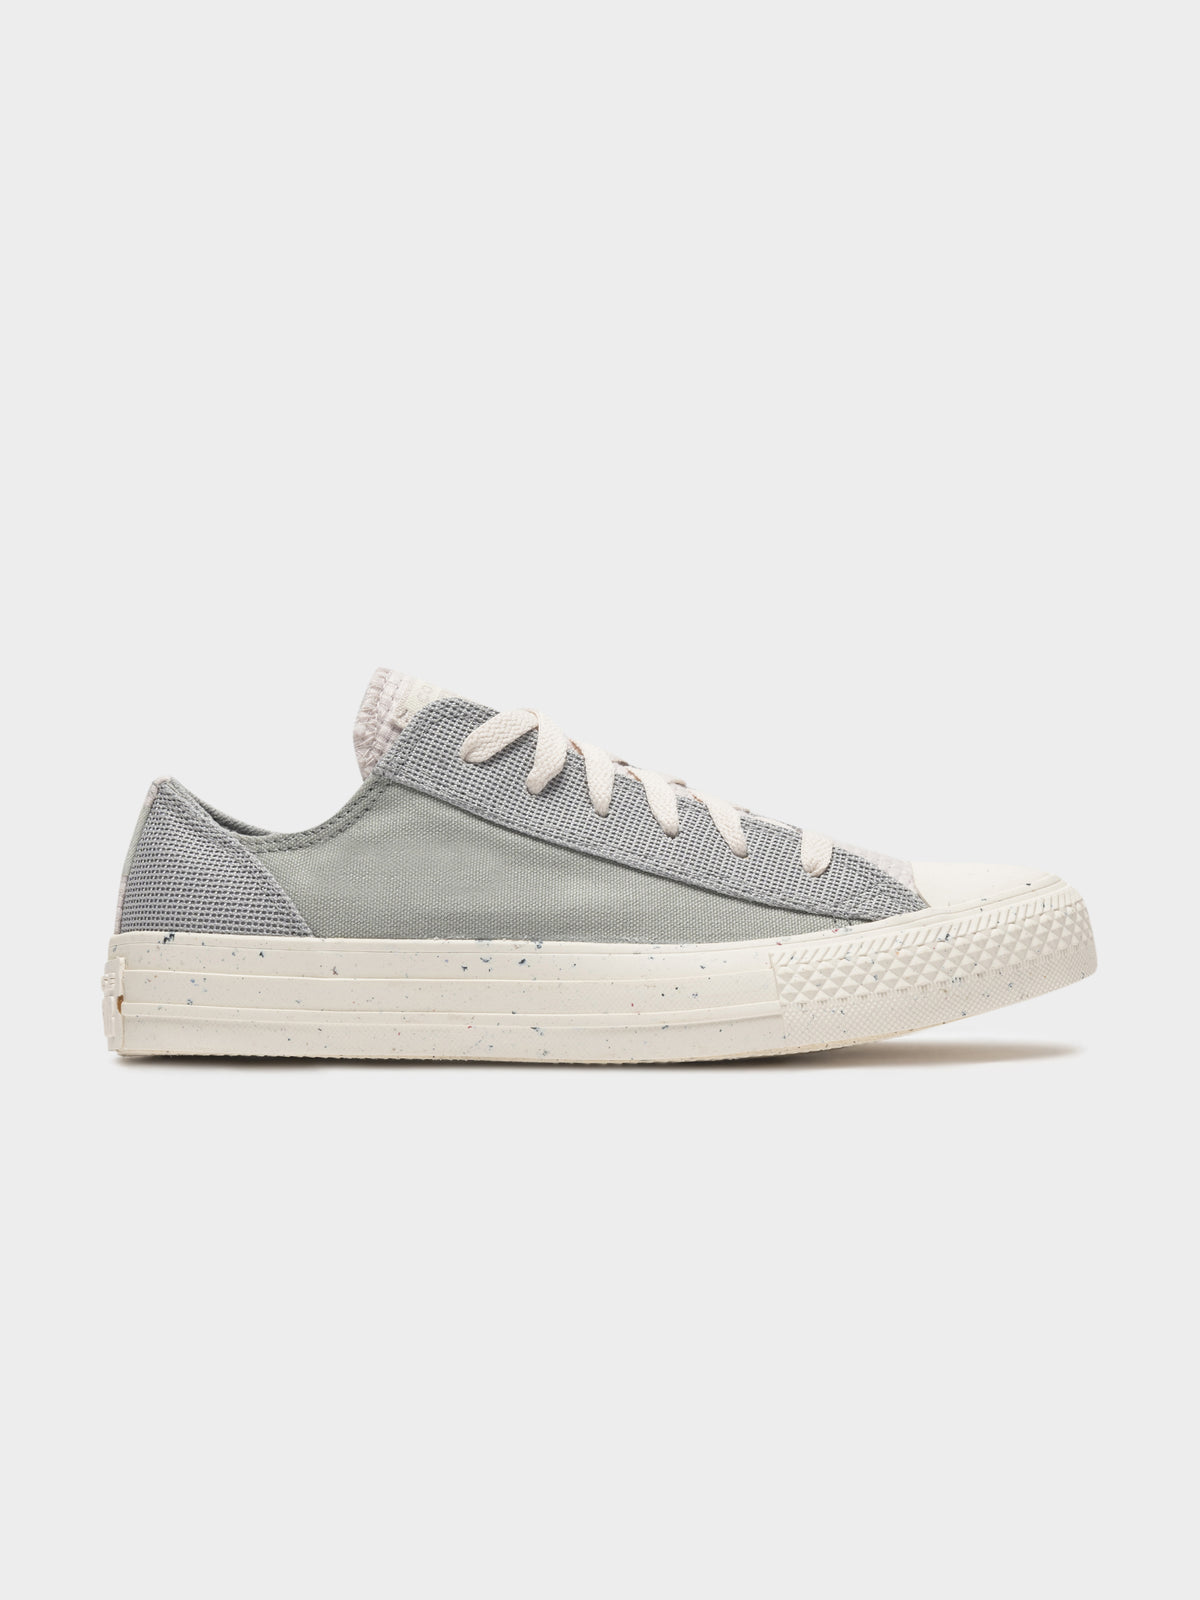 Unisex Chuck Taylor All Star Ox in Grey and Off White